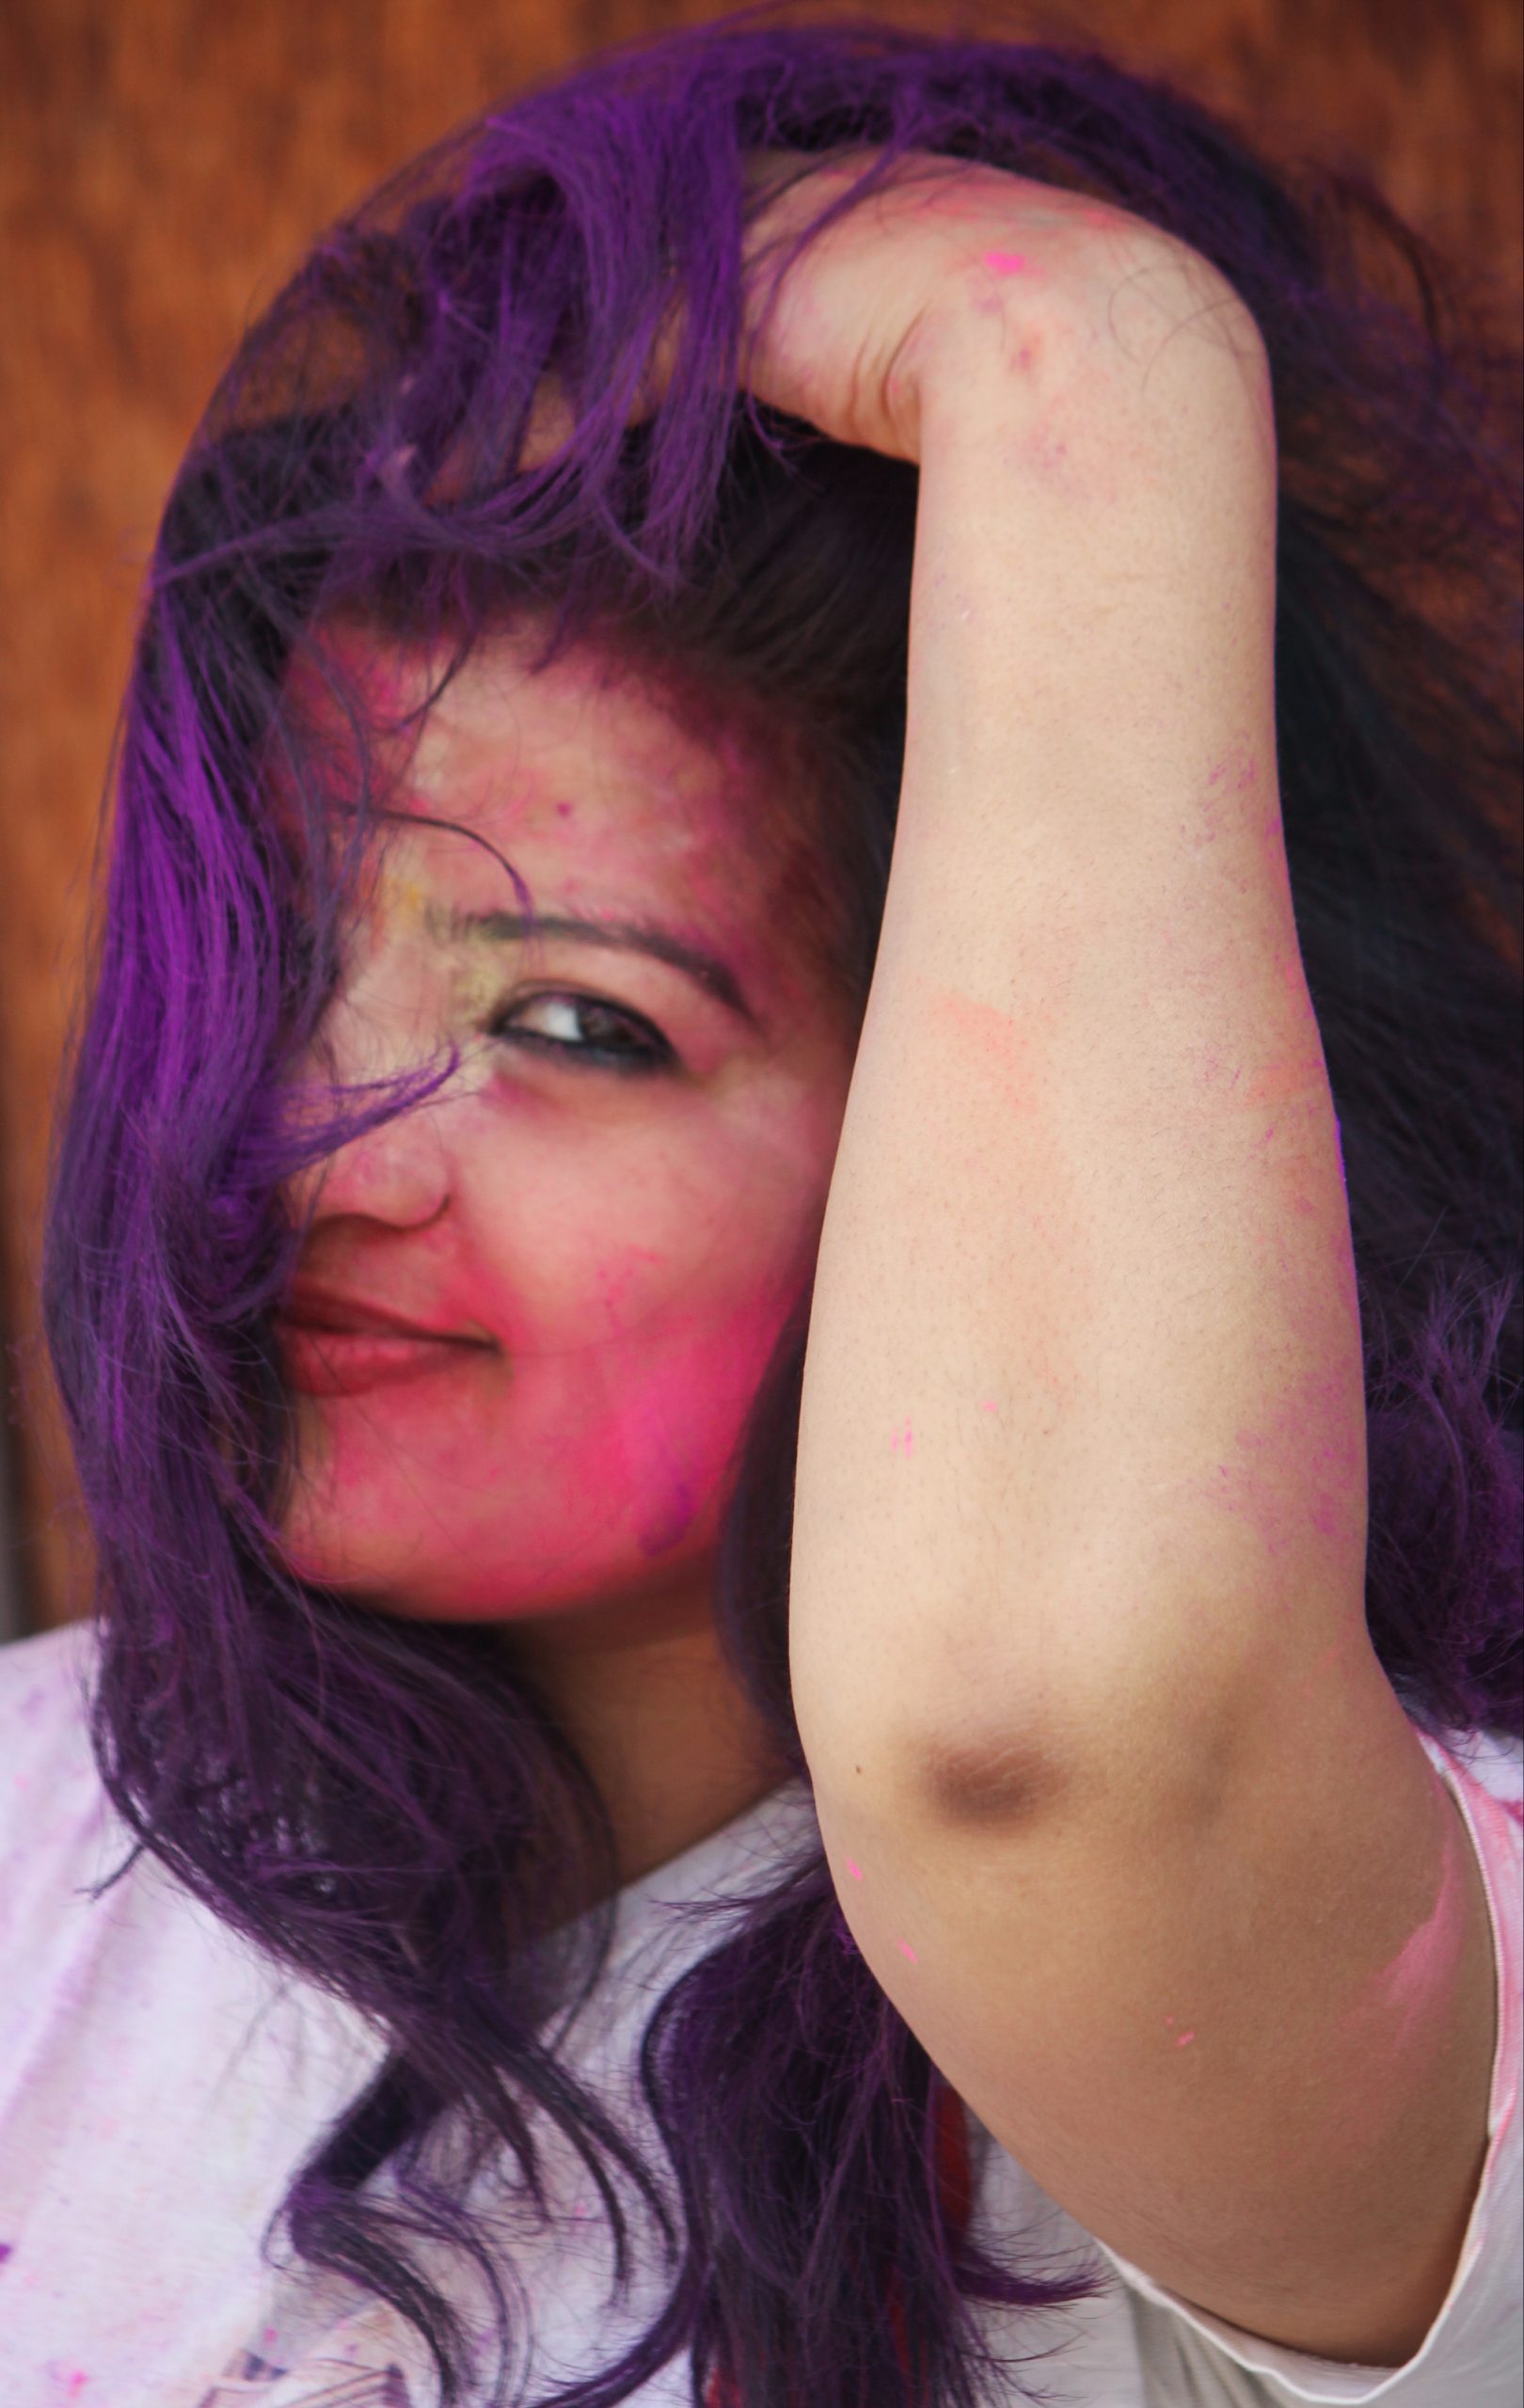 A happy girl during holi festival